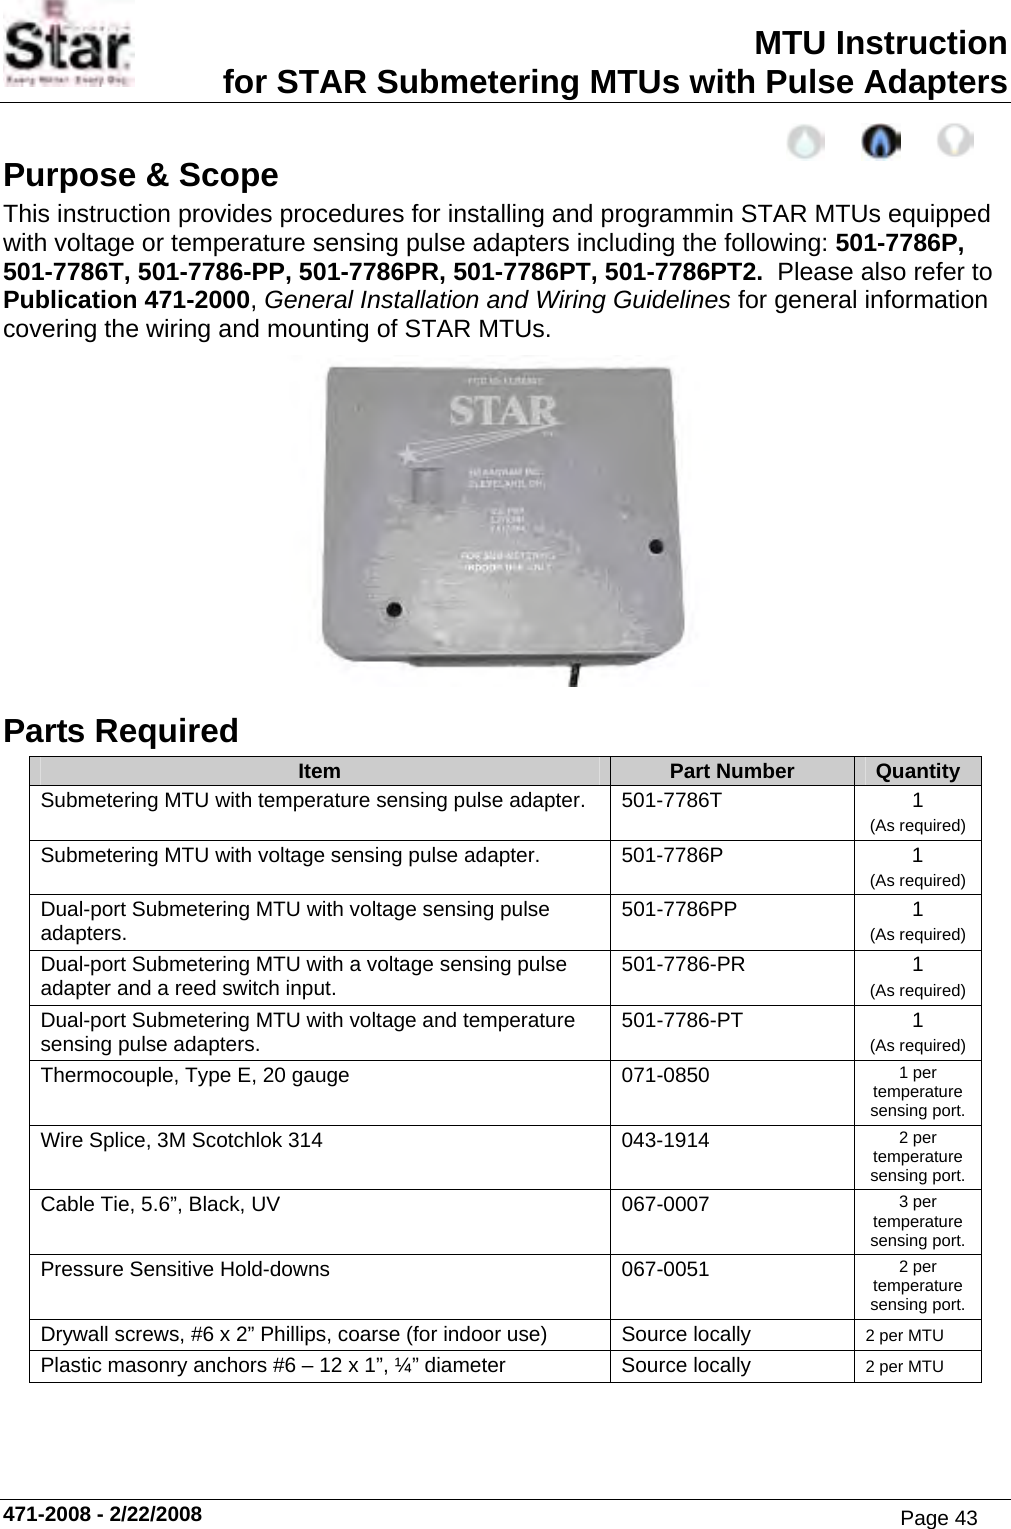 MTU Instruction for STAR Submetering MTUs with Pulse Adapters Purpose &amp; Scope This instruction provides procedures for installing and programmin STAR MTUs equipped with voltage or temperature sensing pulse adapters including the following: 501-7786P, 501-7786T, 501-7786-PP, 501-7786PR, 501-7786PT, 501-7786PT2.  Please also refer to Publication 471-2000, General Installation and Wiring Guidelines for general information covering the wiring and mounting of STAR MTUs.  Parts Required Item  Part Number  Quantity Submetering MTU with temperature sensing pulse adapter.  501-7786T  1 (As required) Submetering MTU with voltage sensing pulse adapter.  501-7786P  1 (As required) Dual-port Submetering MTU with voltage sensing pulse adapters.  501-7786PP 1 (As required) Dual-port Submetering MTU with a voltage sensing pulse adapter and a reed switch input.  501-7786-PR 1 (As required) Dual-port Submetering MTU with voltage and temperature sensing pulse adapters.  501-7786-PT 1 (As required) Thermocouple, Type E, 20 gauge  071-0850  1 per temperature sensing port. Wire Splice, 3M Scotchlok 314  043-1914  2 per temperature sensing port. Cable Tie, 5.6”, Black, UV  067-0007  3 per temperature sensing port. Pressure Sensitive Hold-downs  067-0051  2 per temperature sensing port. Drywall screws, #6 x 2” Phillips, coarse (for indoor use)  Source locally  2 per MTU Plastic masonry anchors #6 – 12 x 1”, ¼” diameter  Source locally  2 per MTU      471-2008 - 2/22/2008 Page 43